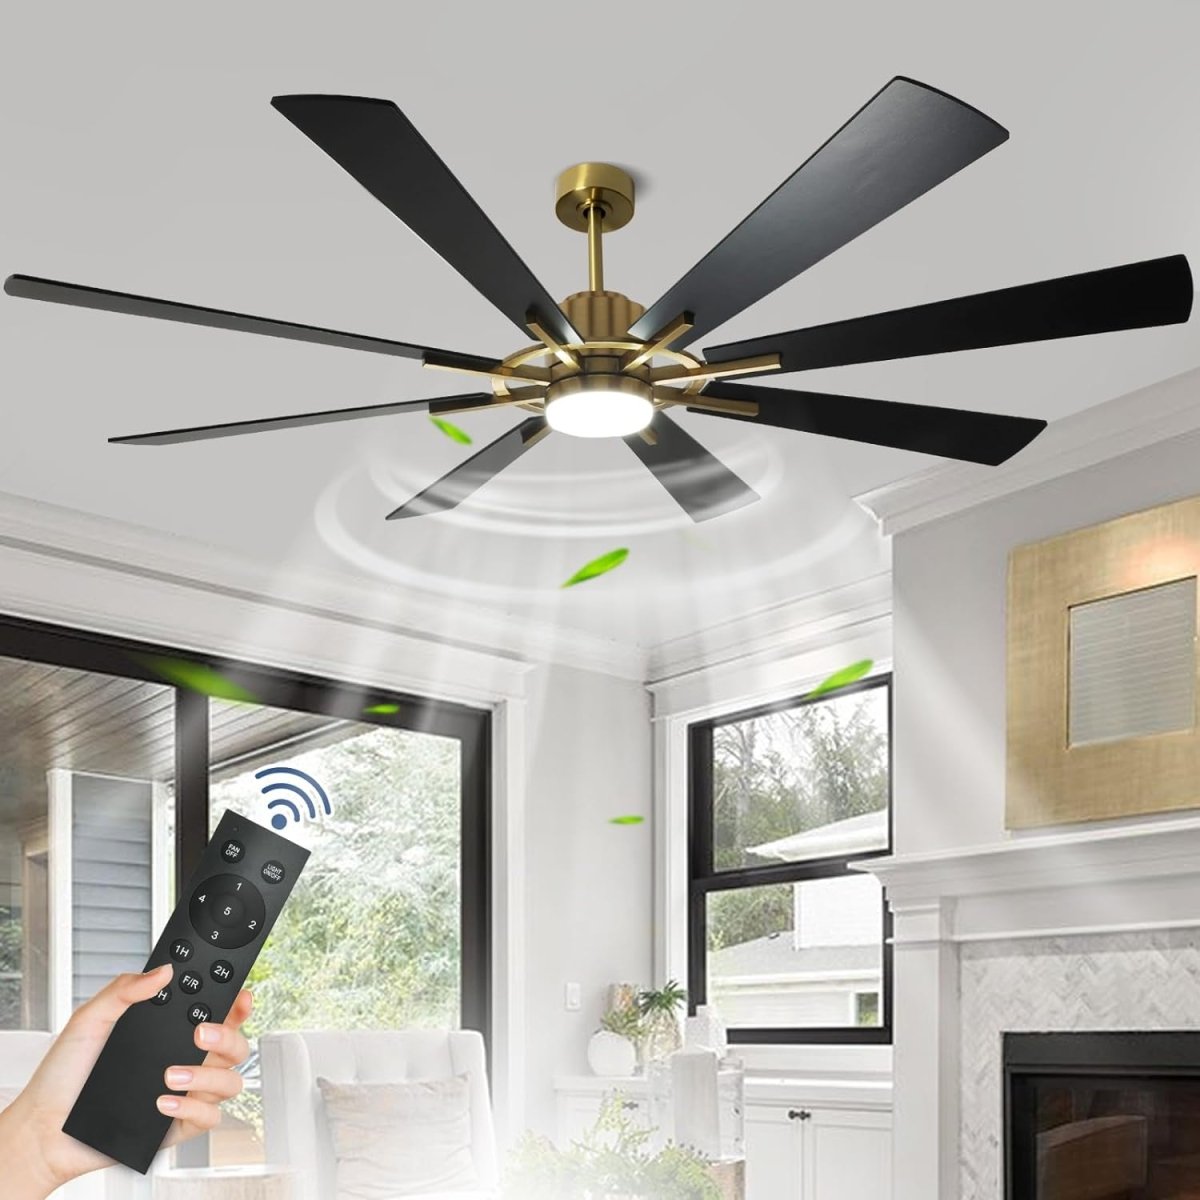 Depuley Large Ceiling Fan with Lights, 72" DC Reversible Ceiling Fan with Light LED, 8 Plywood Blades 5 Speed, Modern Industrial Ceiling Fans Indoor for Living Room, Color Changeable 3000K-6000K, Black & Gold - WS-FPZ45-18C-CO 1 | DEPULEY